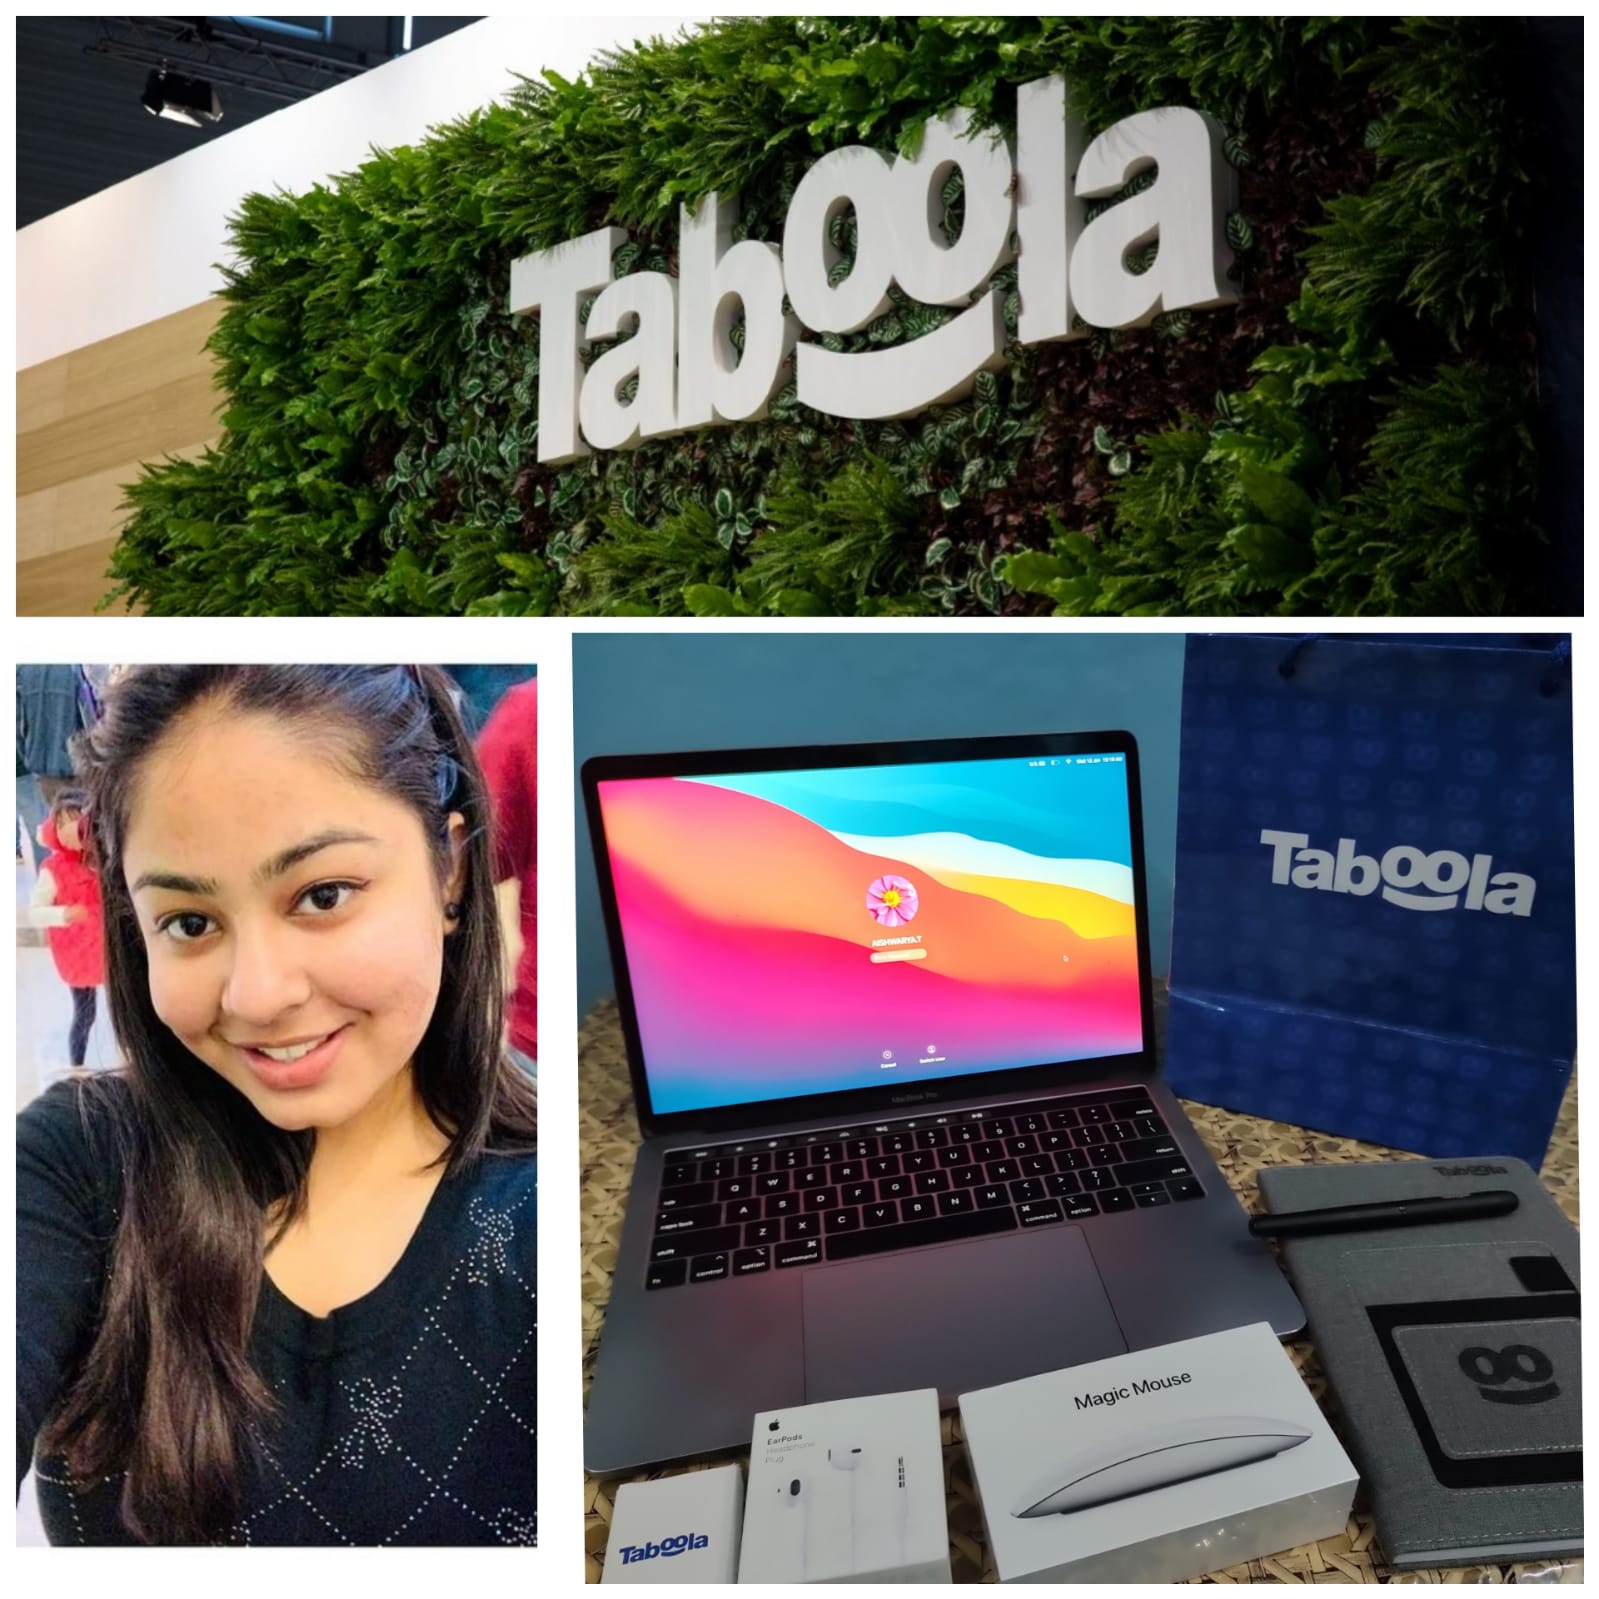 Student placed at Taboola